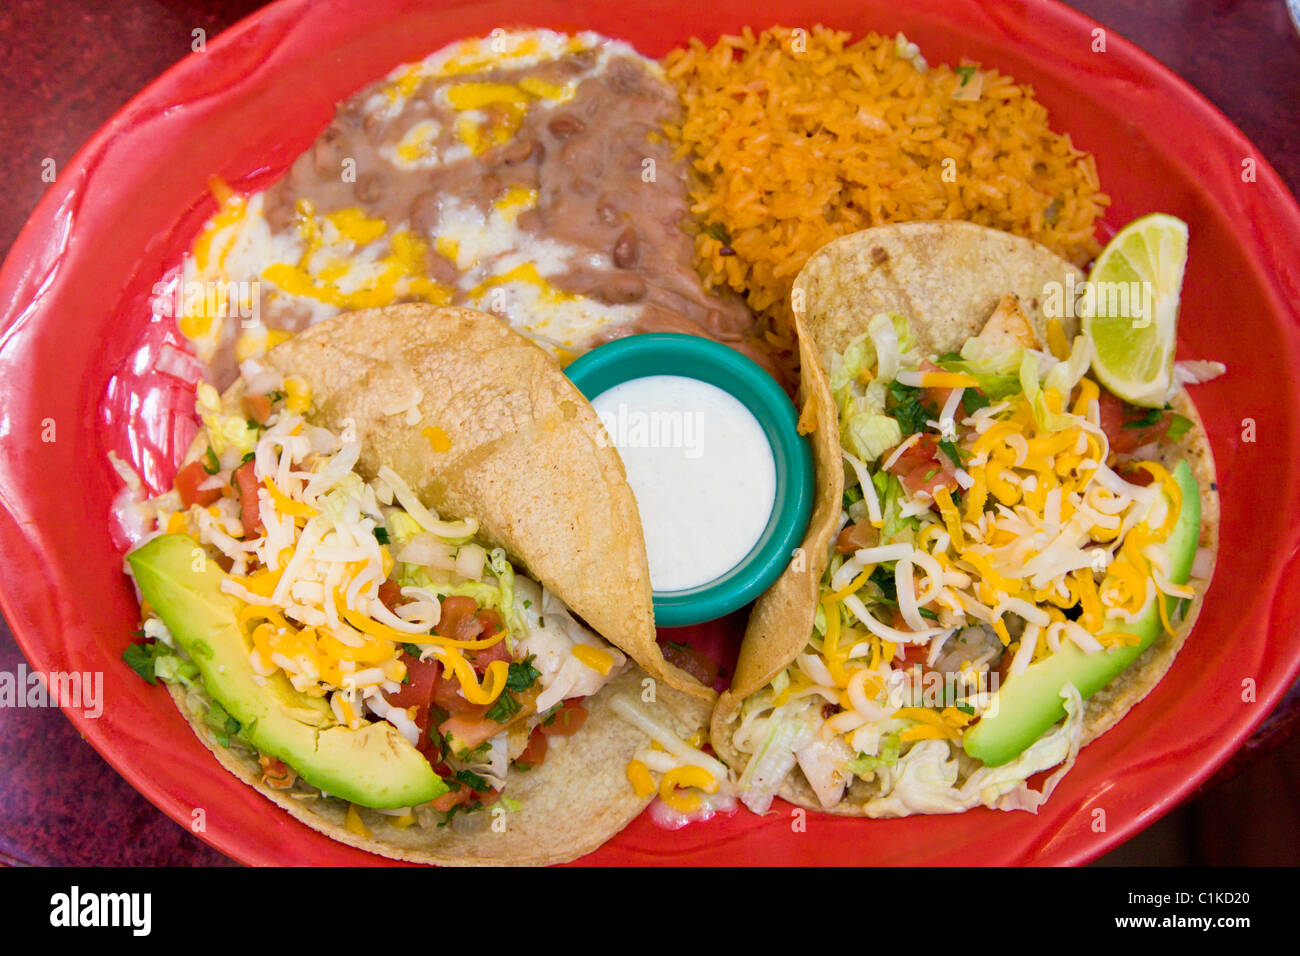 Tacos dinner with rice and re fried beans Stock Photo